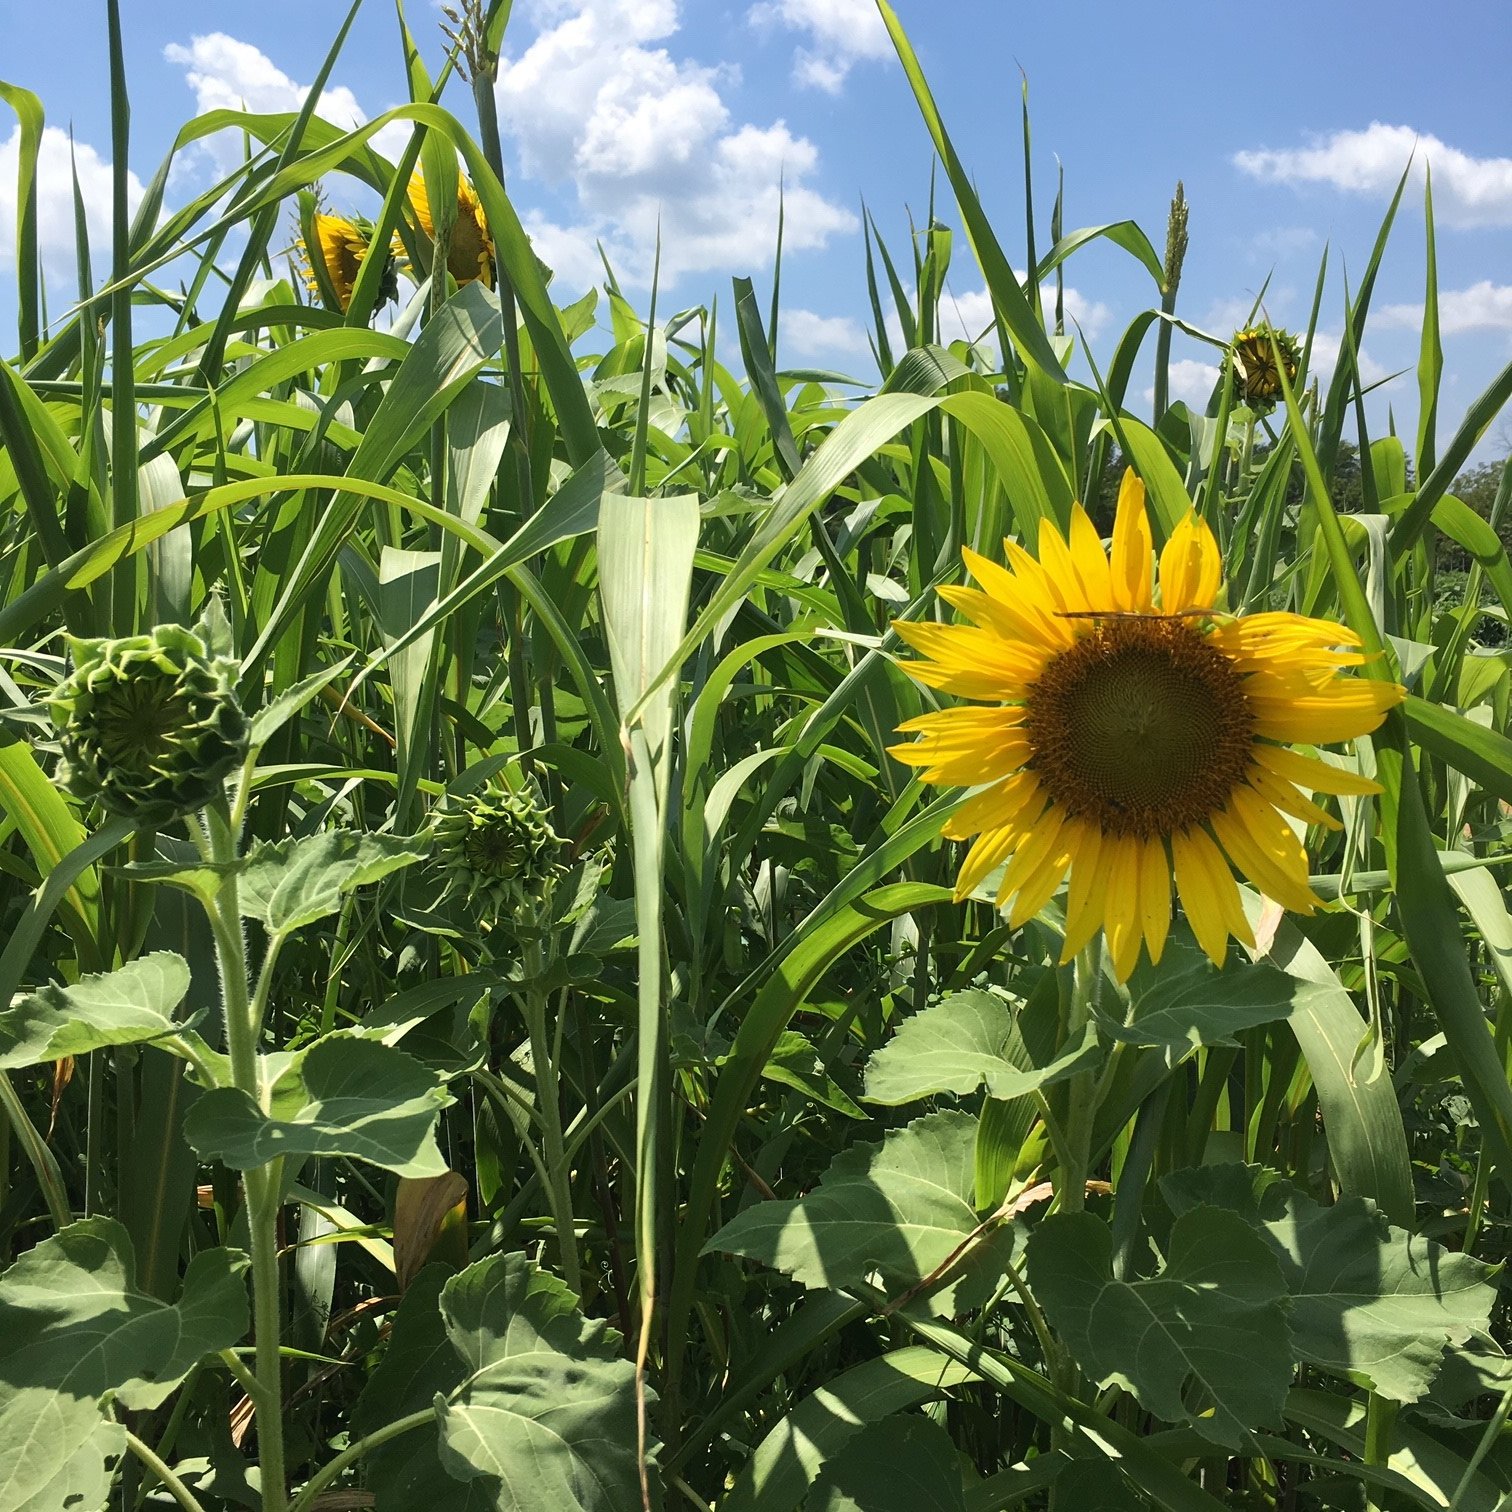 Previous Happening: Uncovering Cover Crops